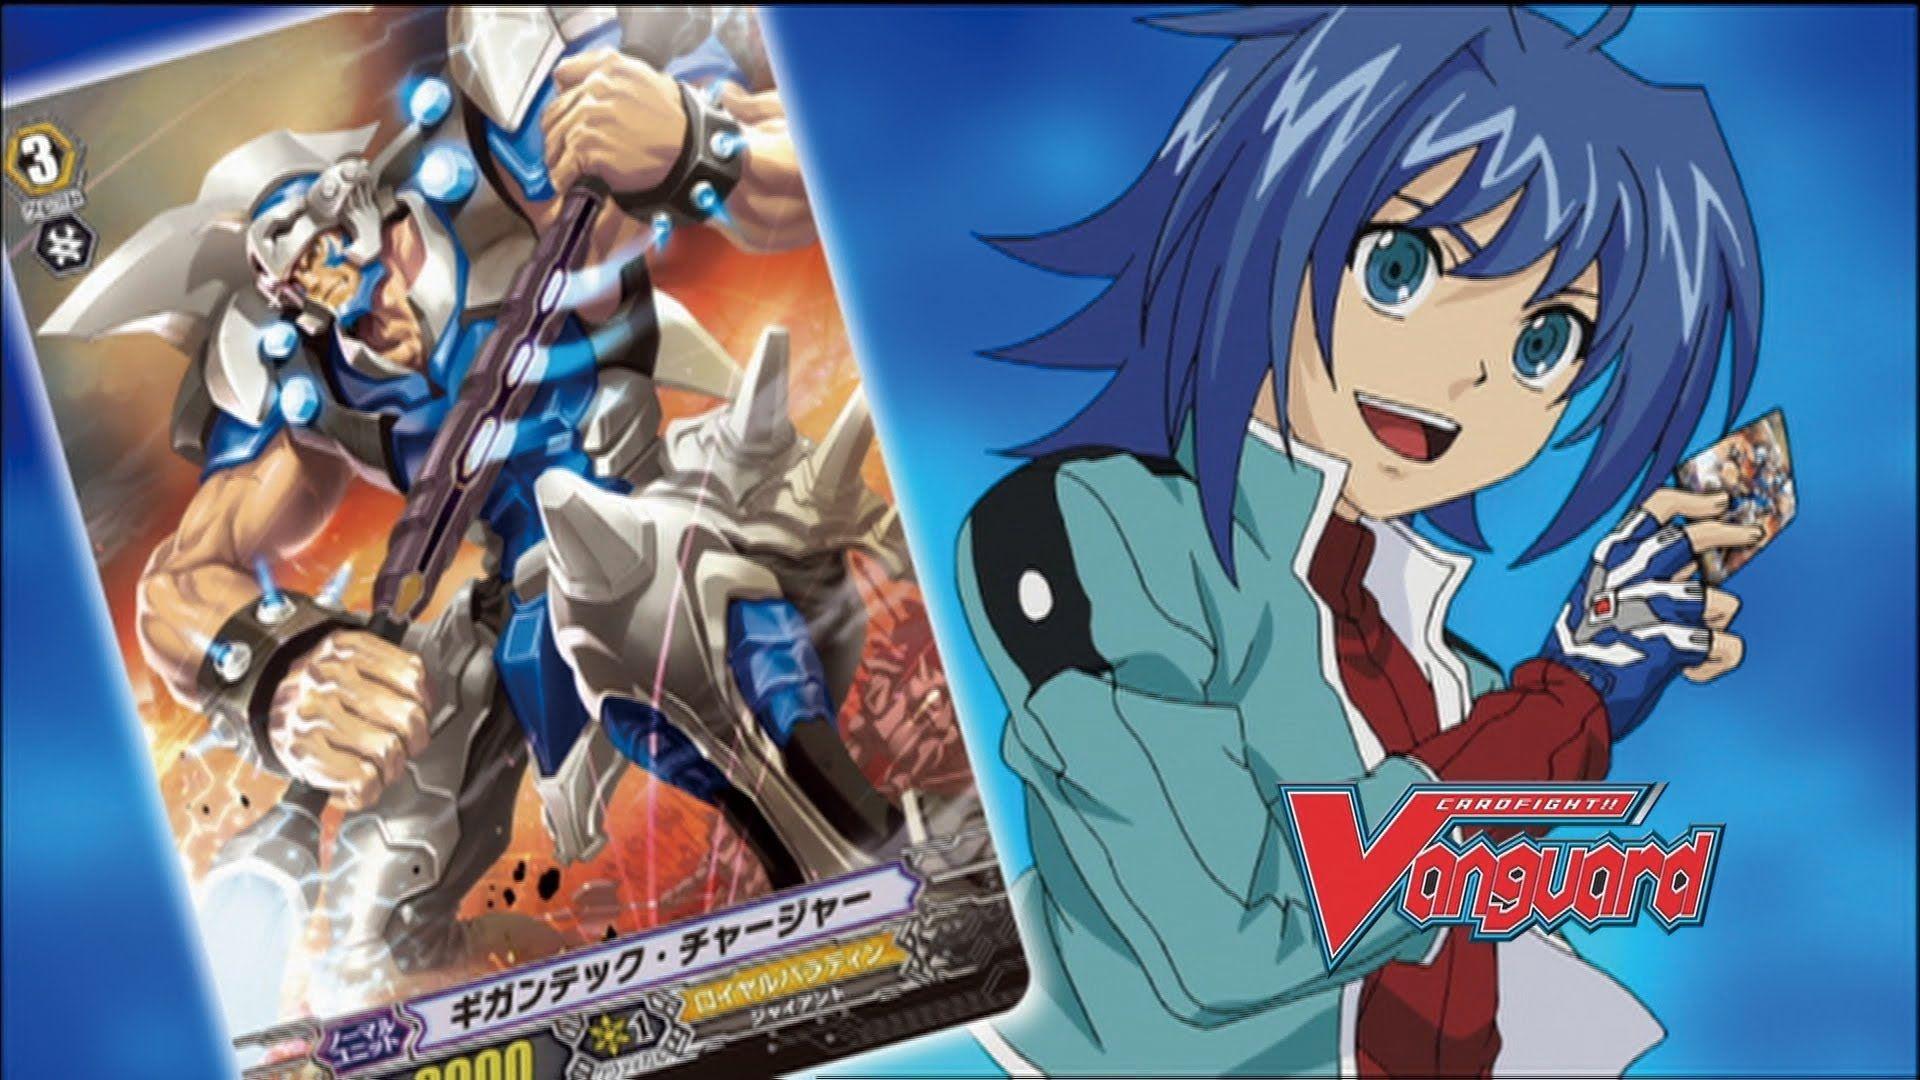 Wallpaper.wiki Cardfight Vanguard Image PIC WPC007808